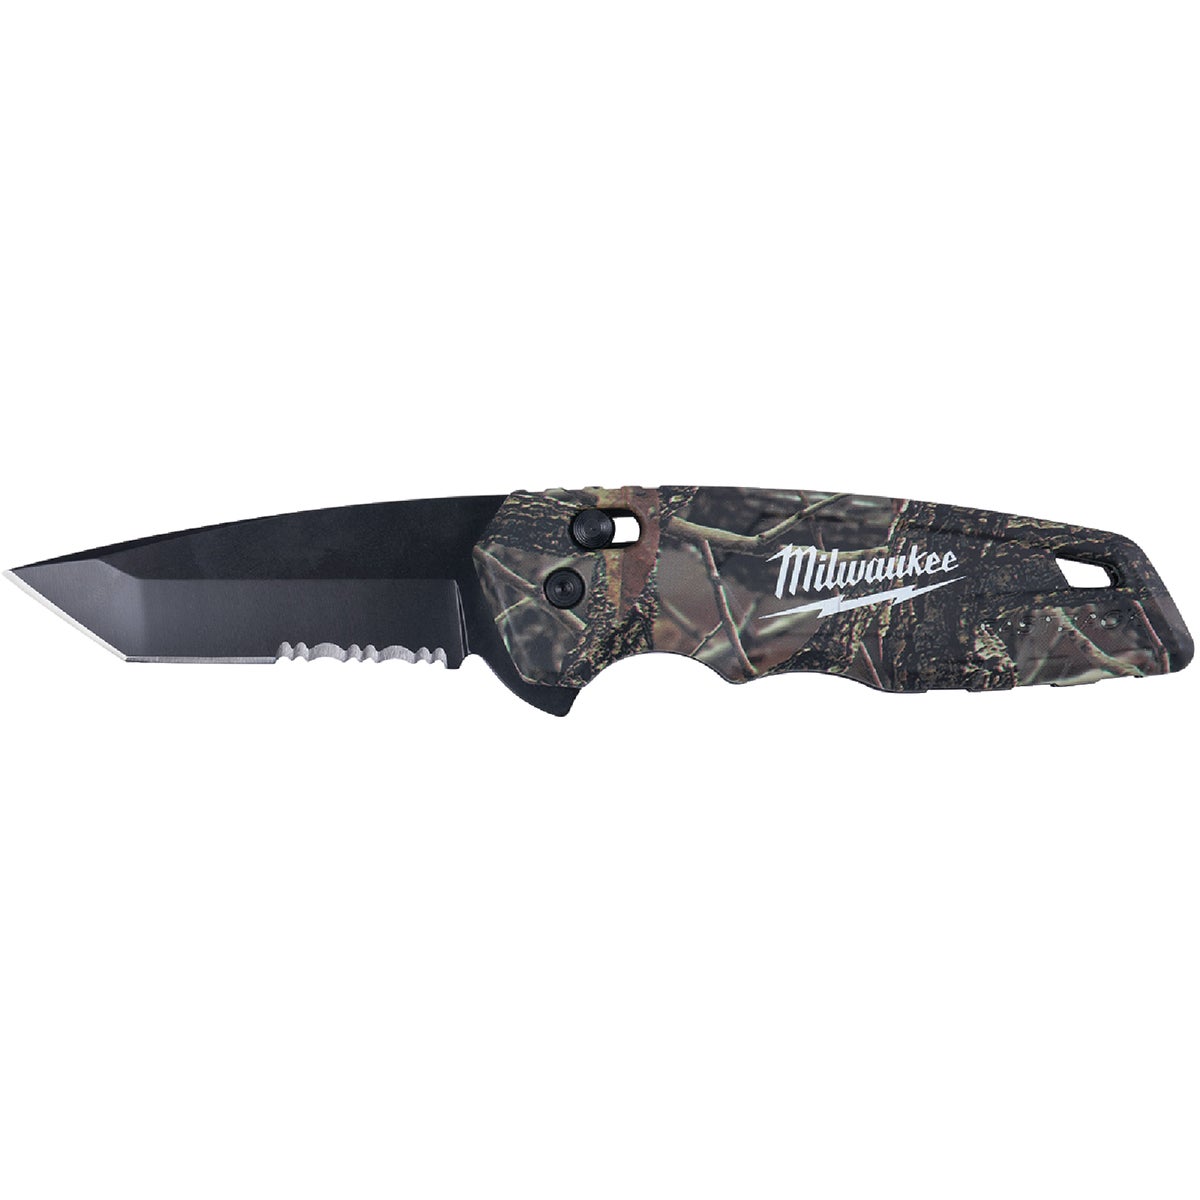 Item 303618, FASTBACK Camo spring assisted pocket knife combines jobsite performance 